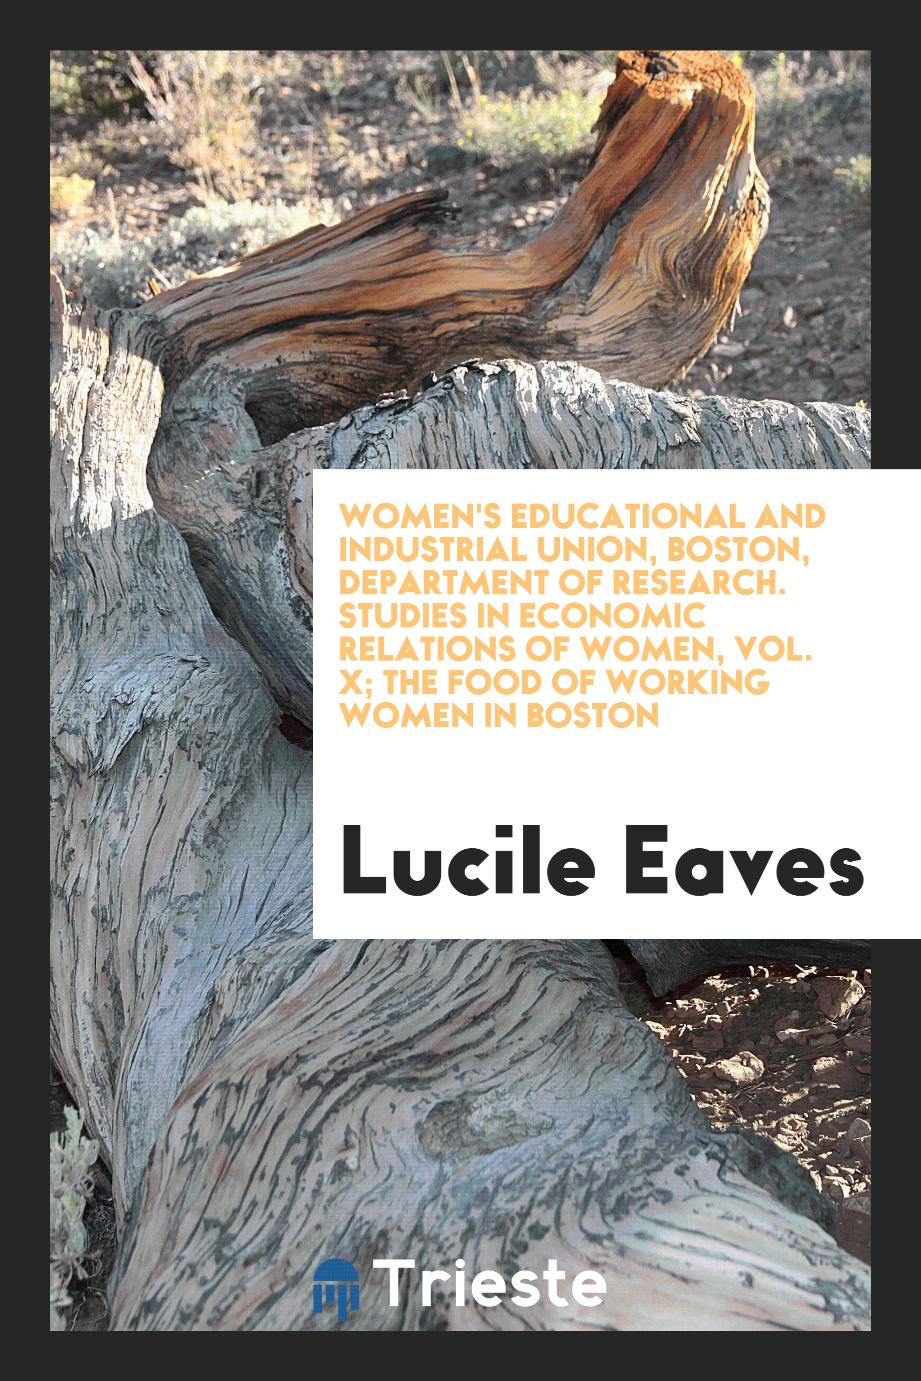 Women's Educational and Industrial Union, Boston, Department of Research. Studies in Economic Relations of Women, Vol. X; The Food of Working Women in Boston